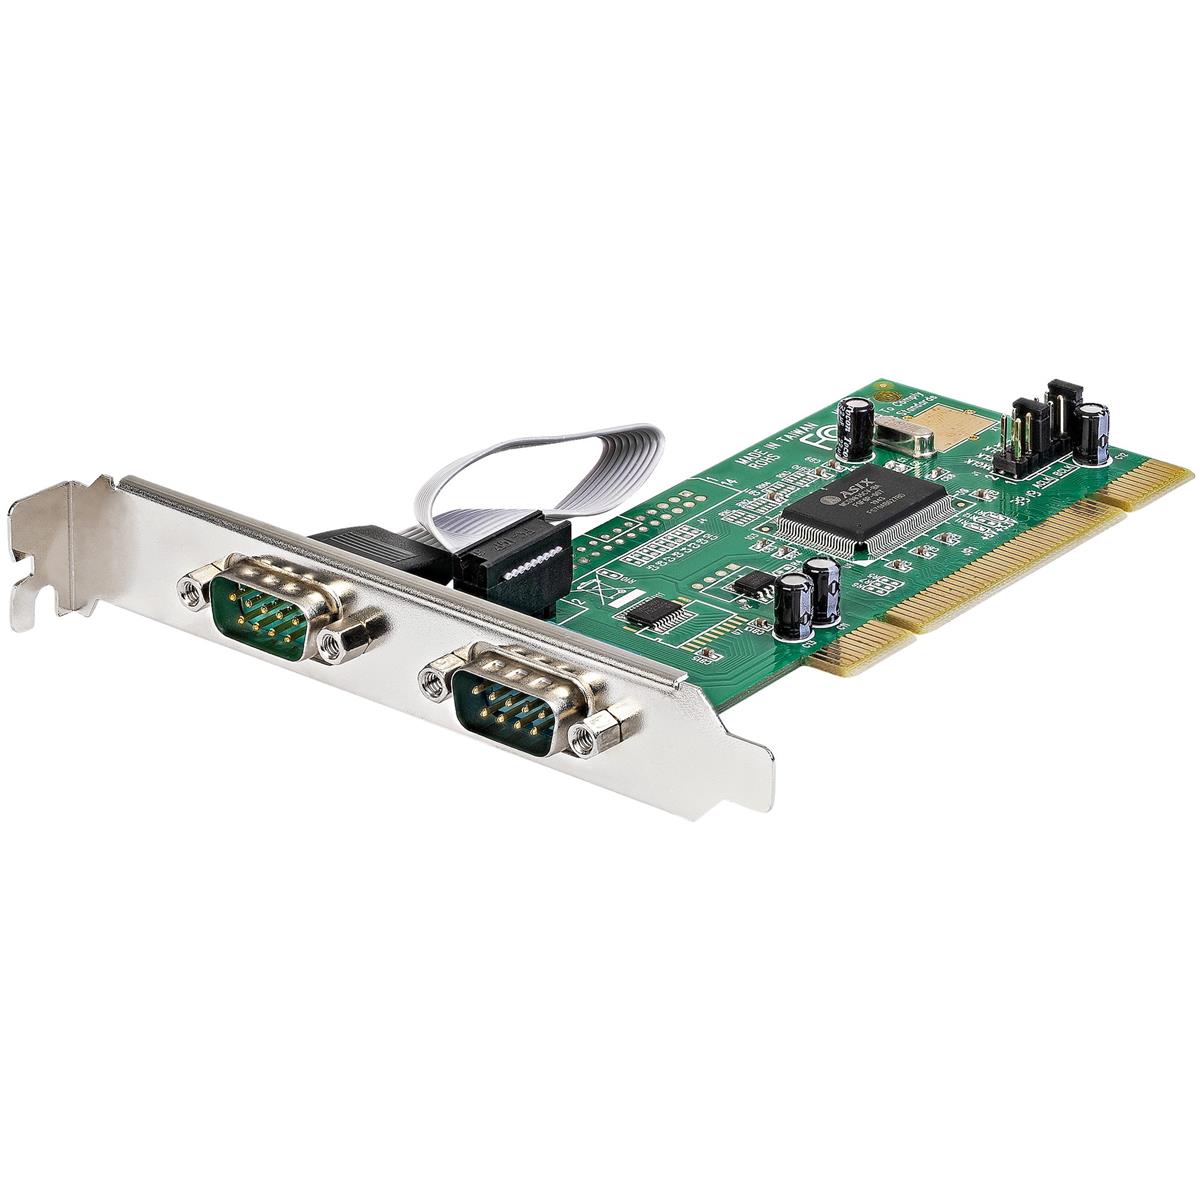 Image of StarTech 2 Port PCI RS232 Serial Adapter Card with 16550 UART